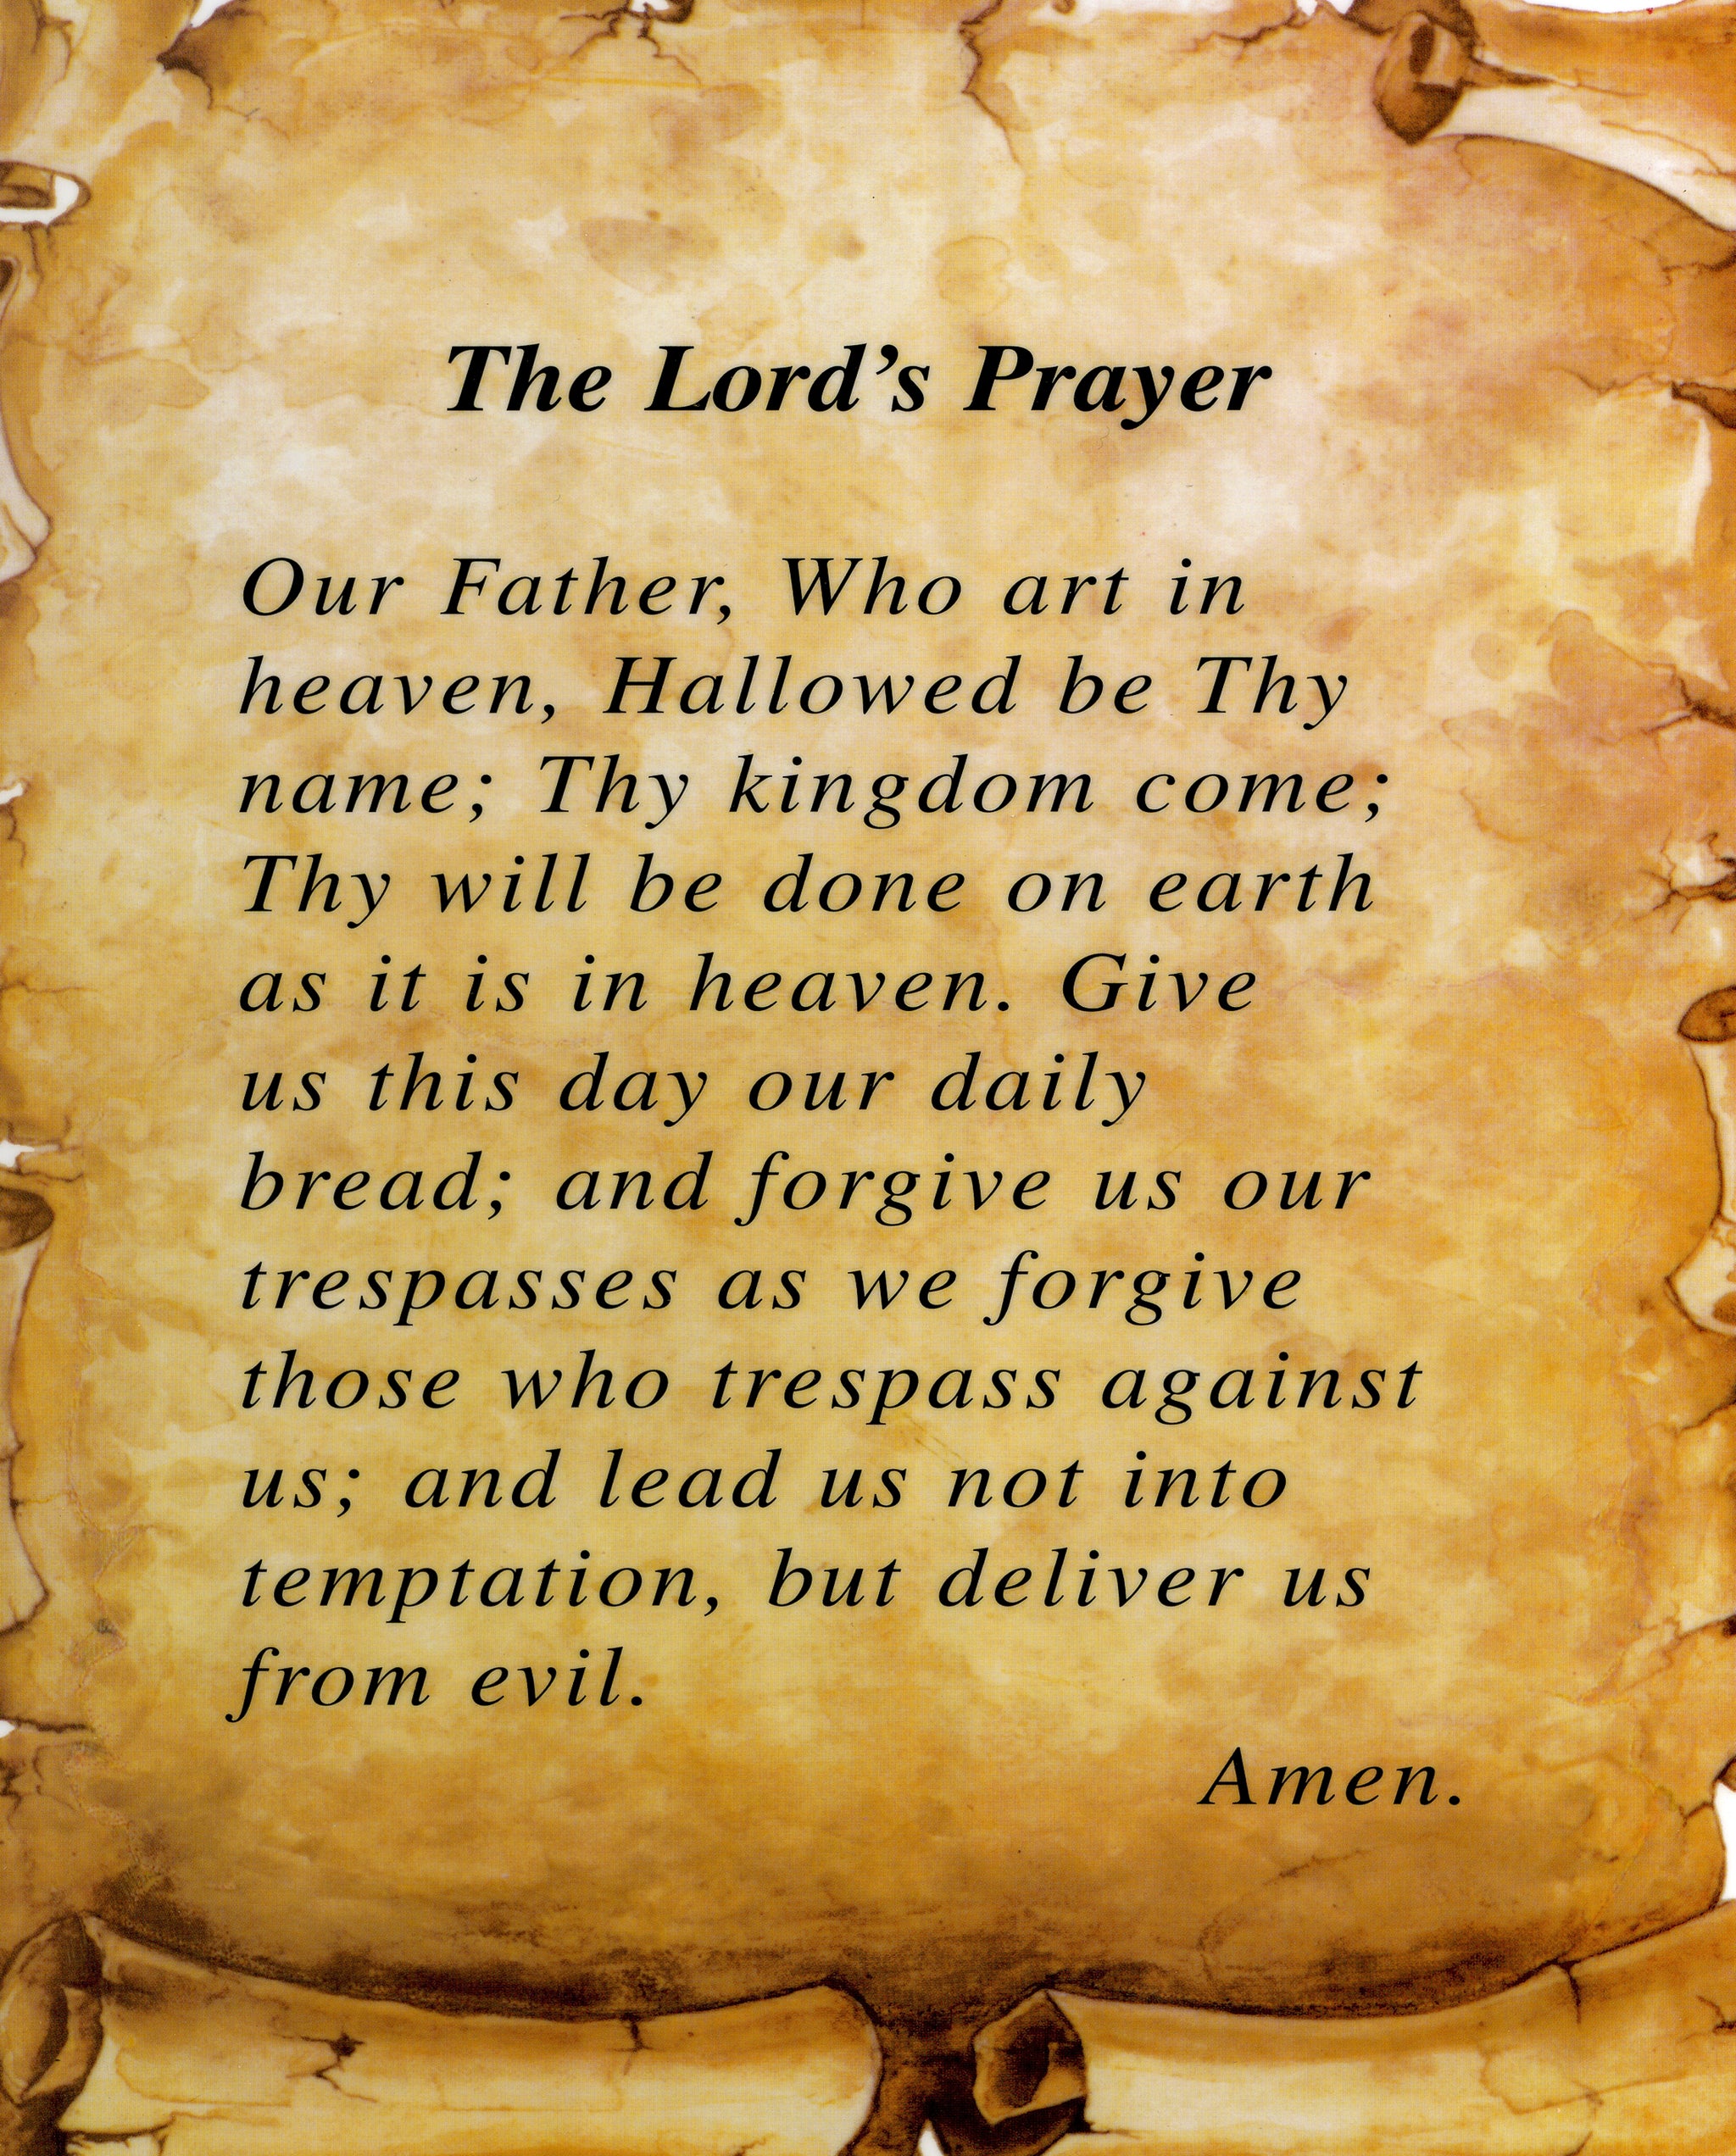 All 90+ Images pictures of the lord’s prayer Latest